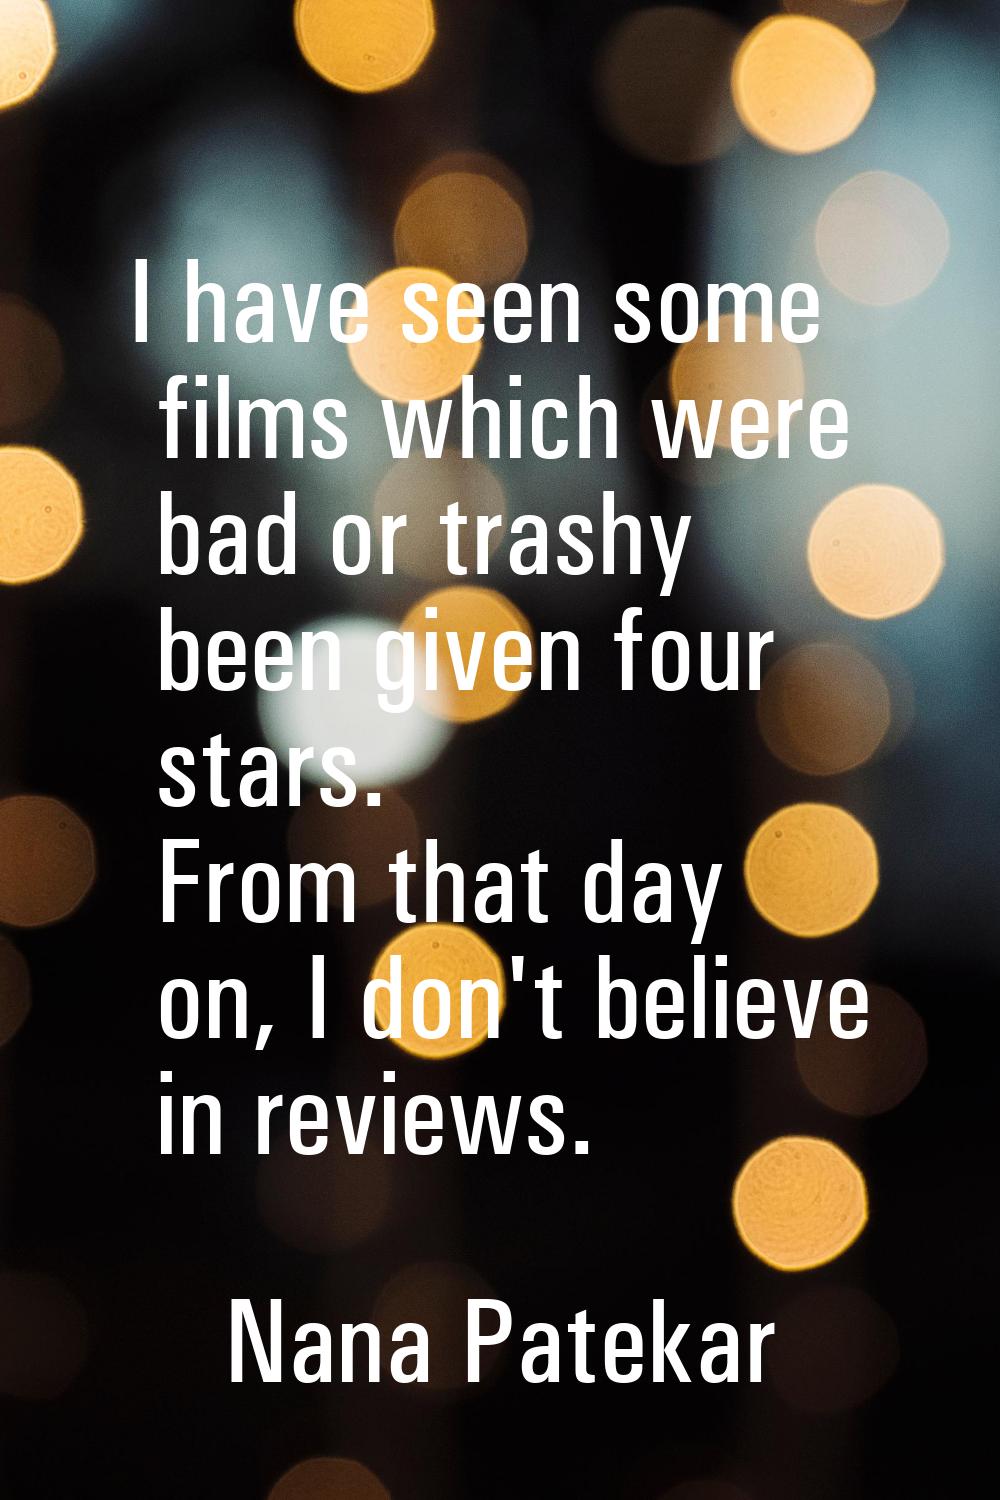 I have seen some films which were bad or trashy been given four stars. From that day on, I don't be